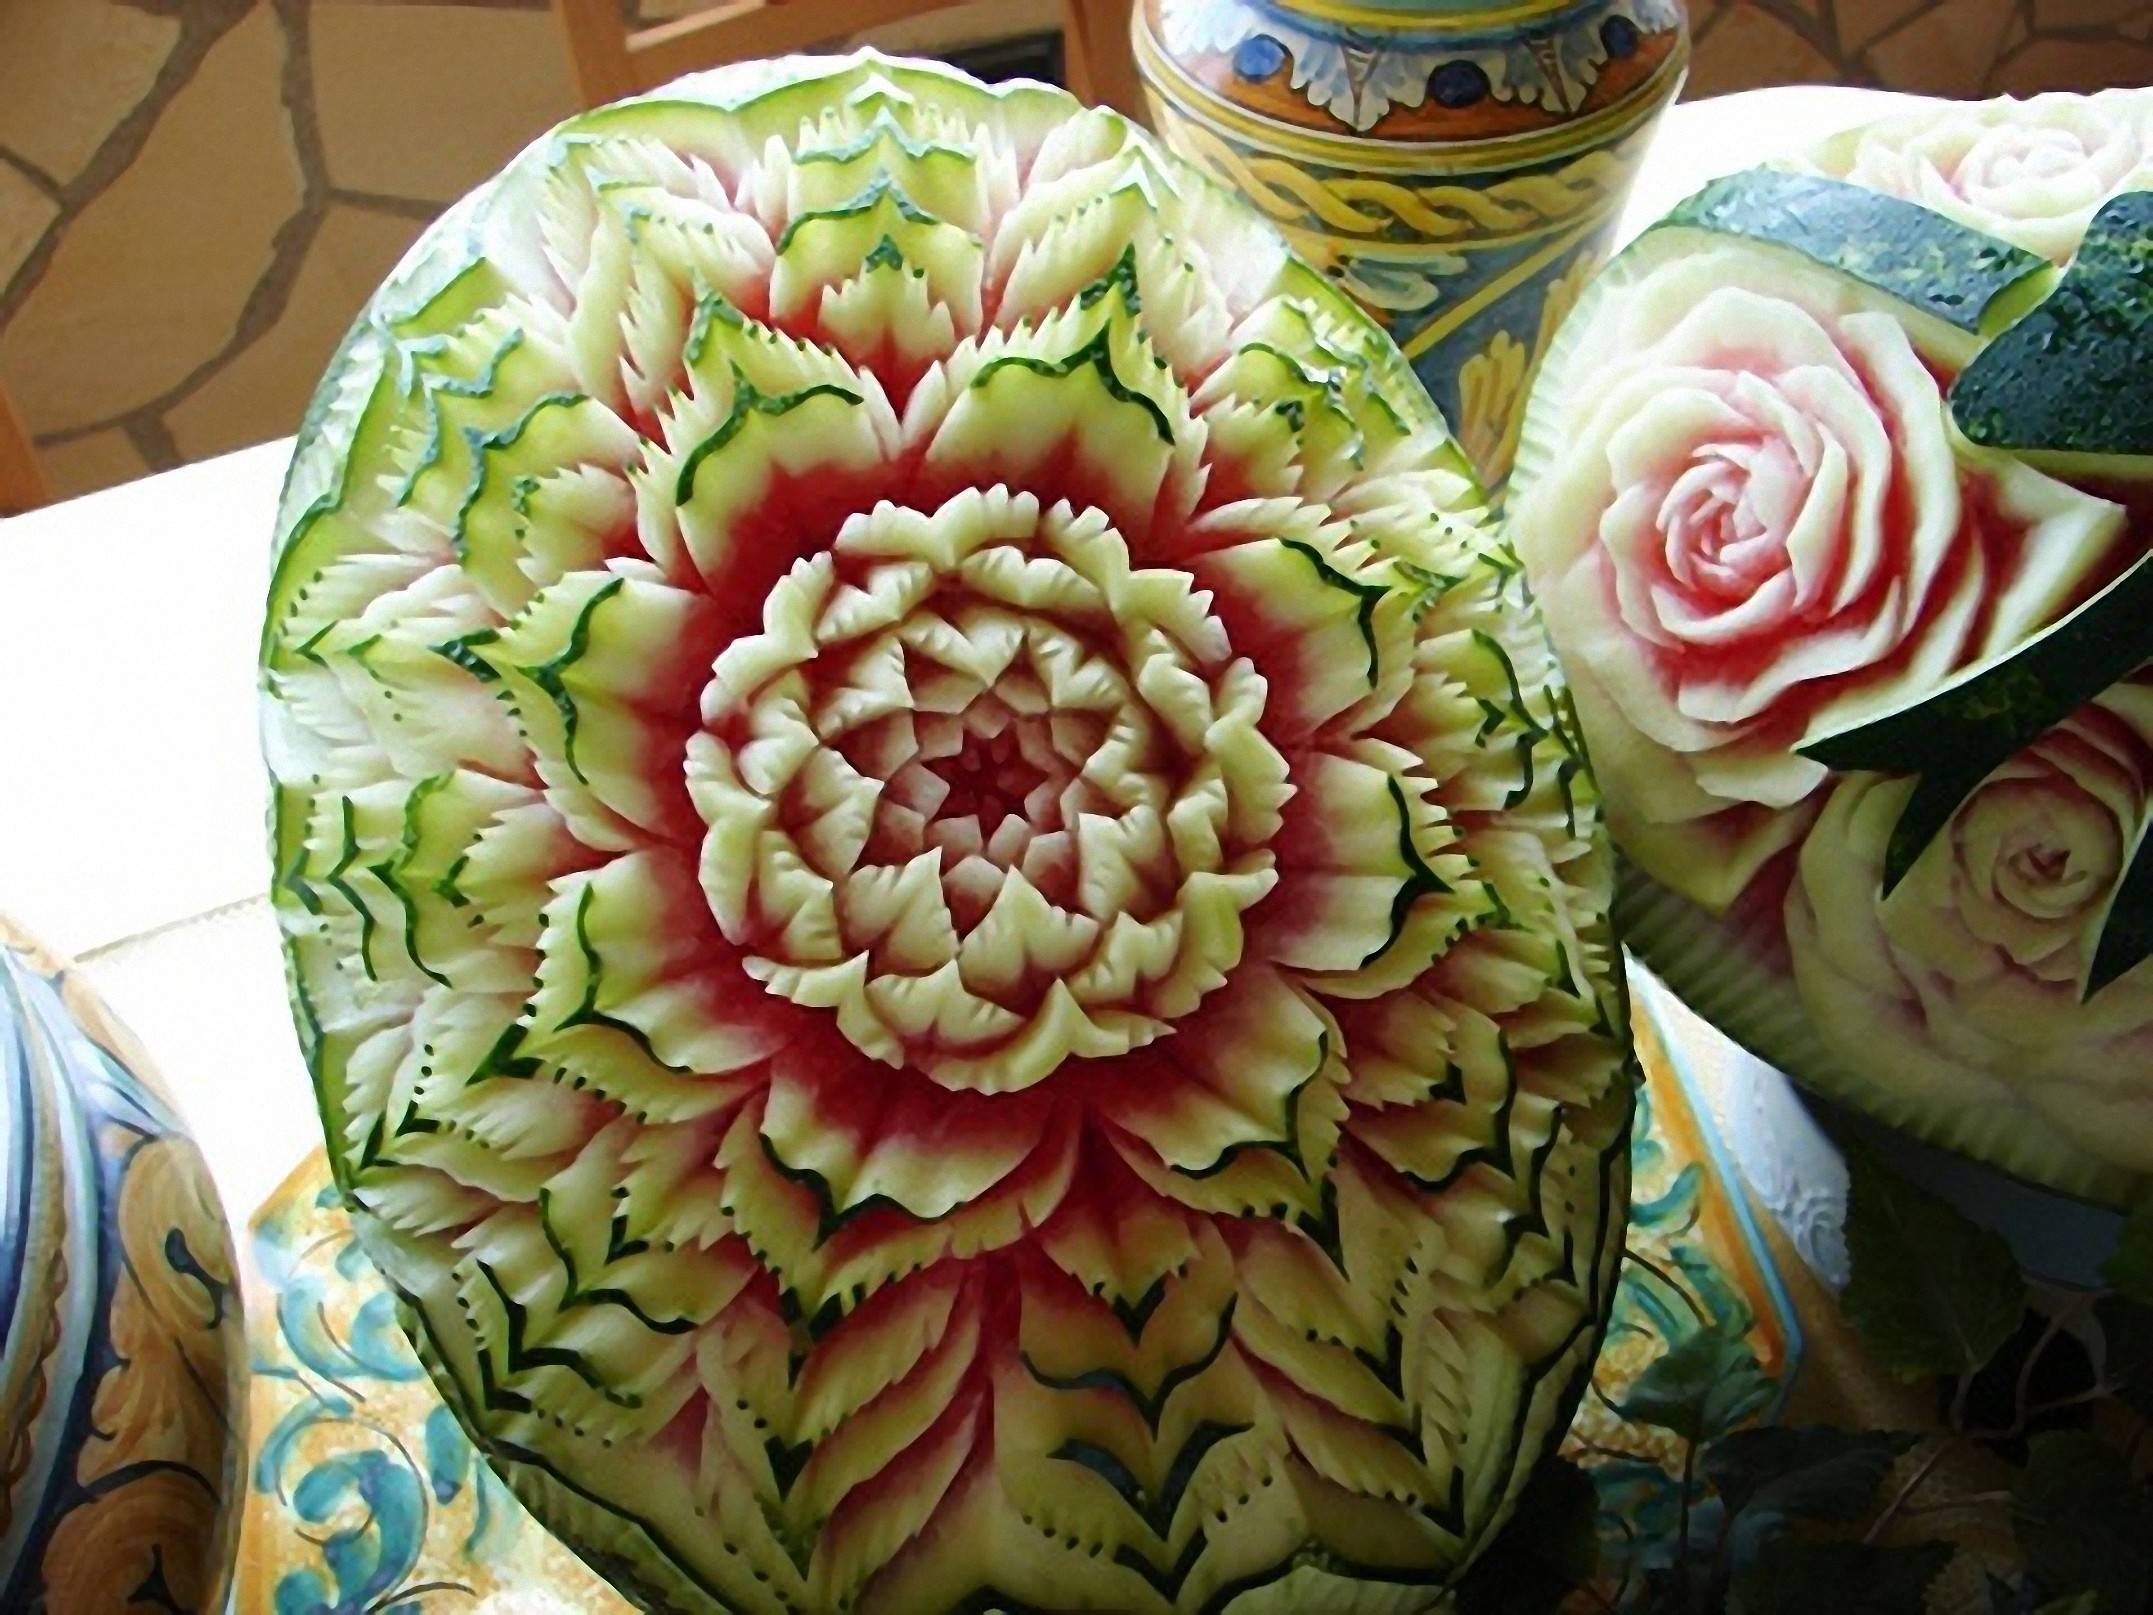 Food Artistic Flower Carving 2153x1615